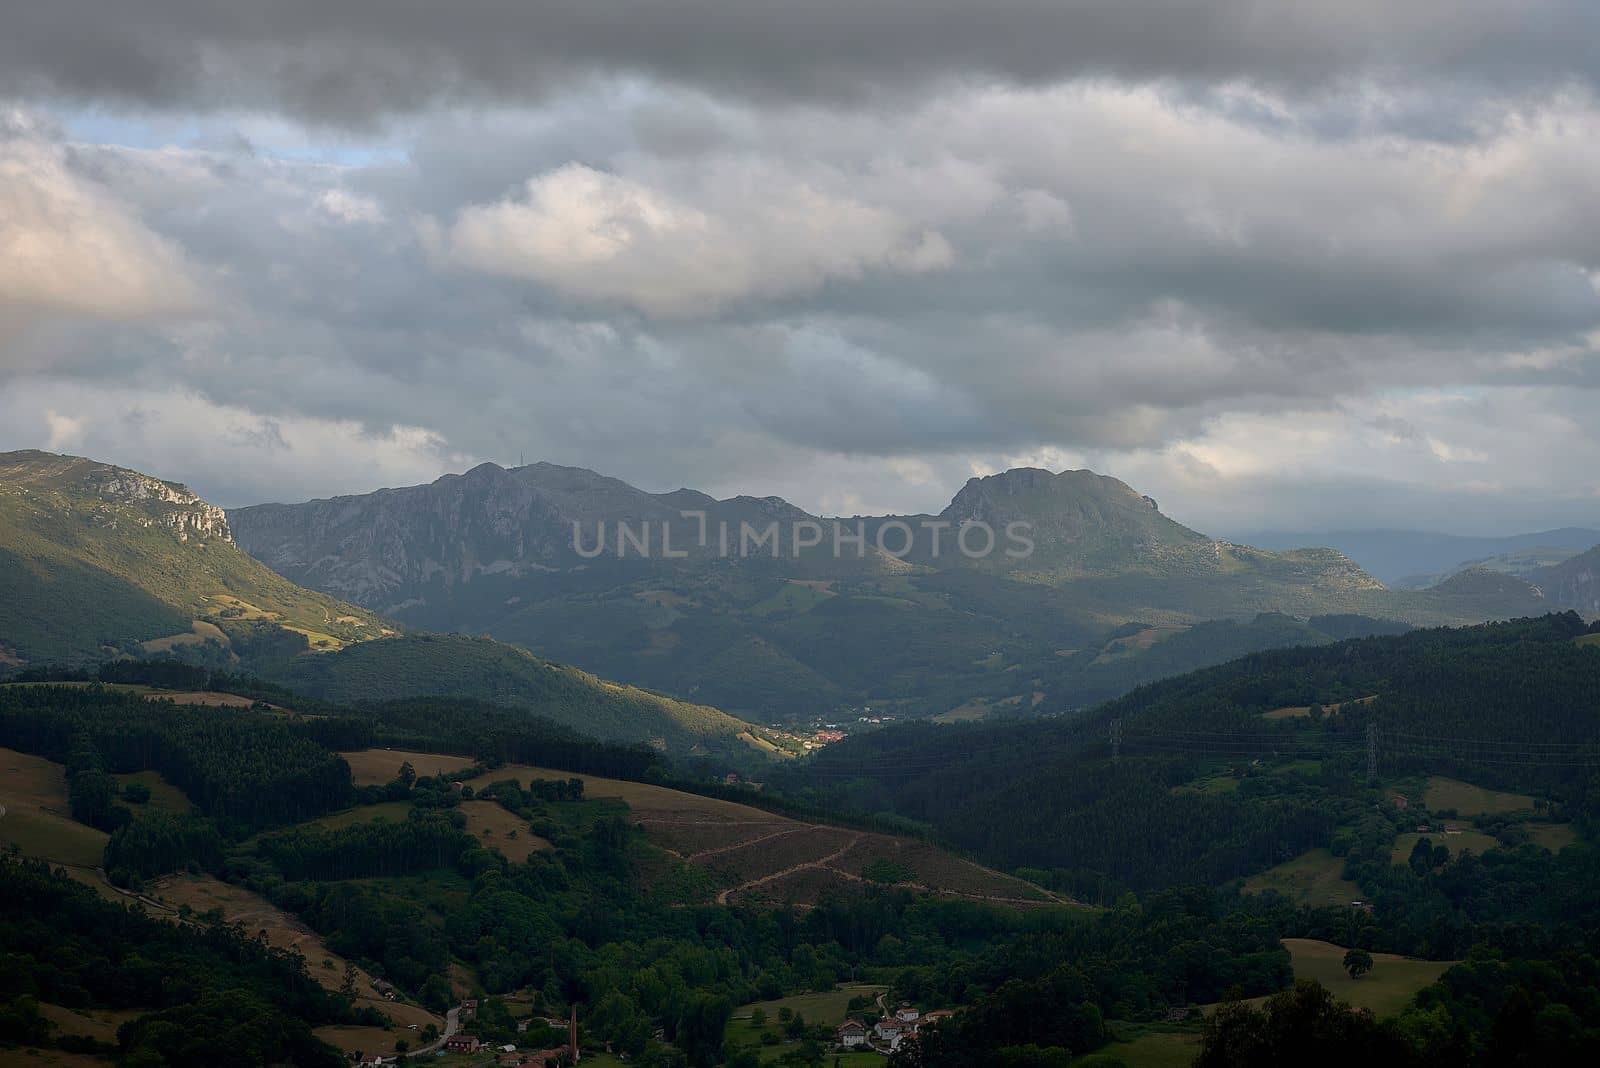 Rustic mountain landscape with cloudy sky.Bien Aparecida, Cantabria, meadows, trees and pastures for animals, rustic houses, sky with storm clouds.